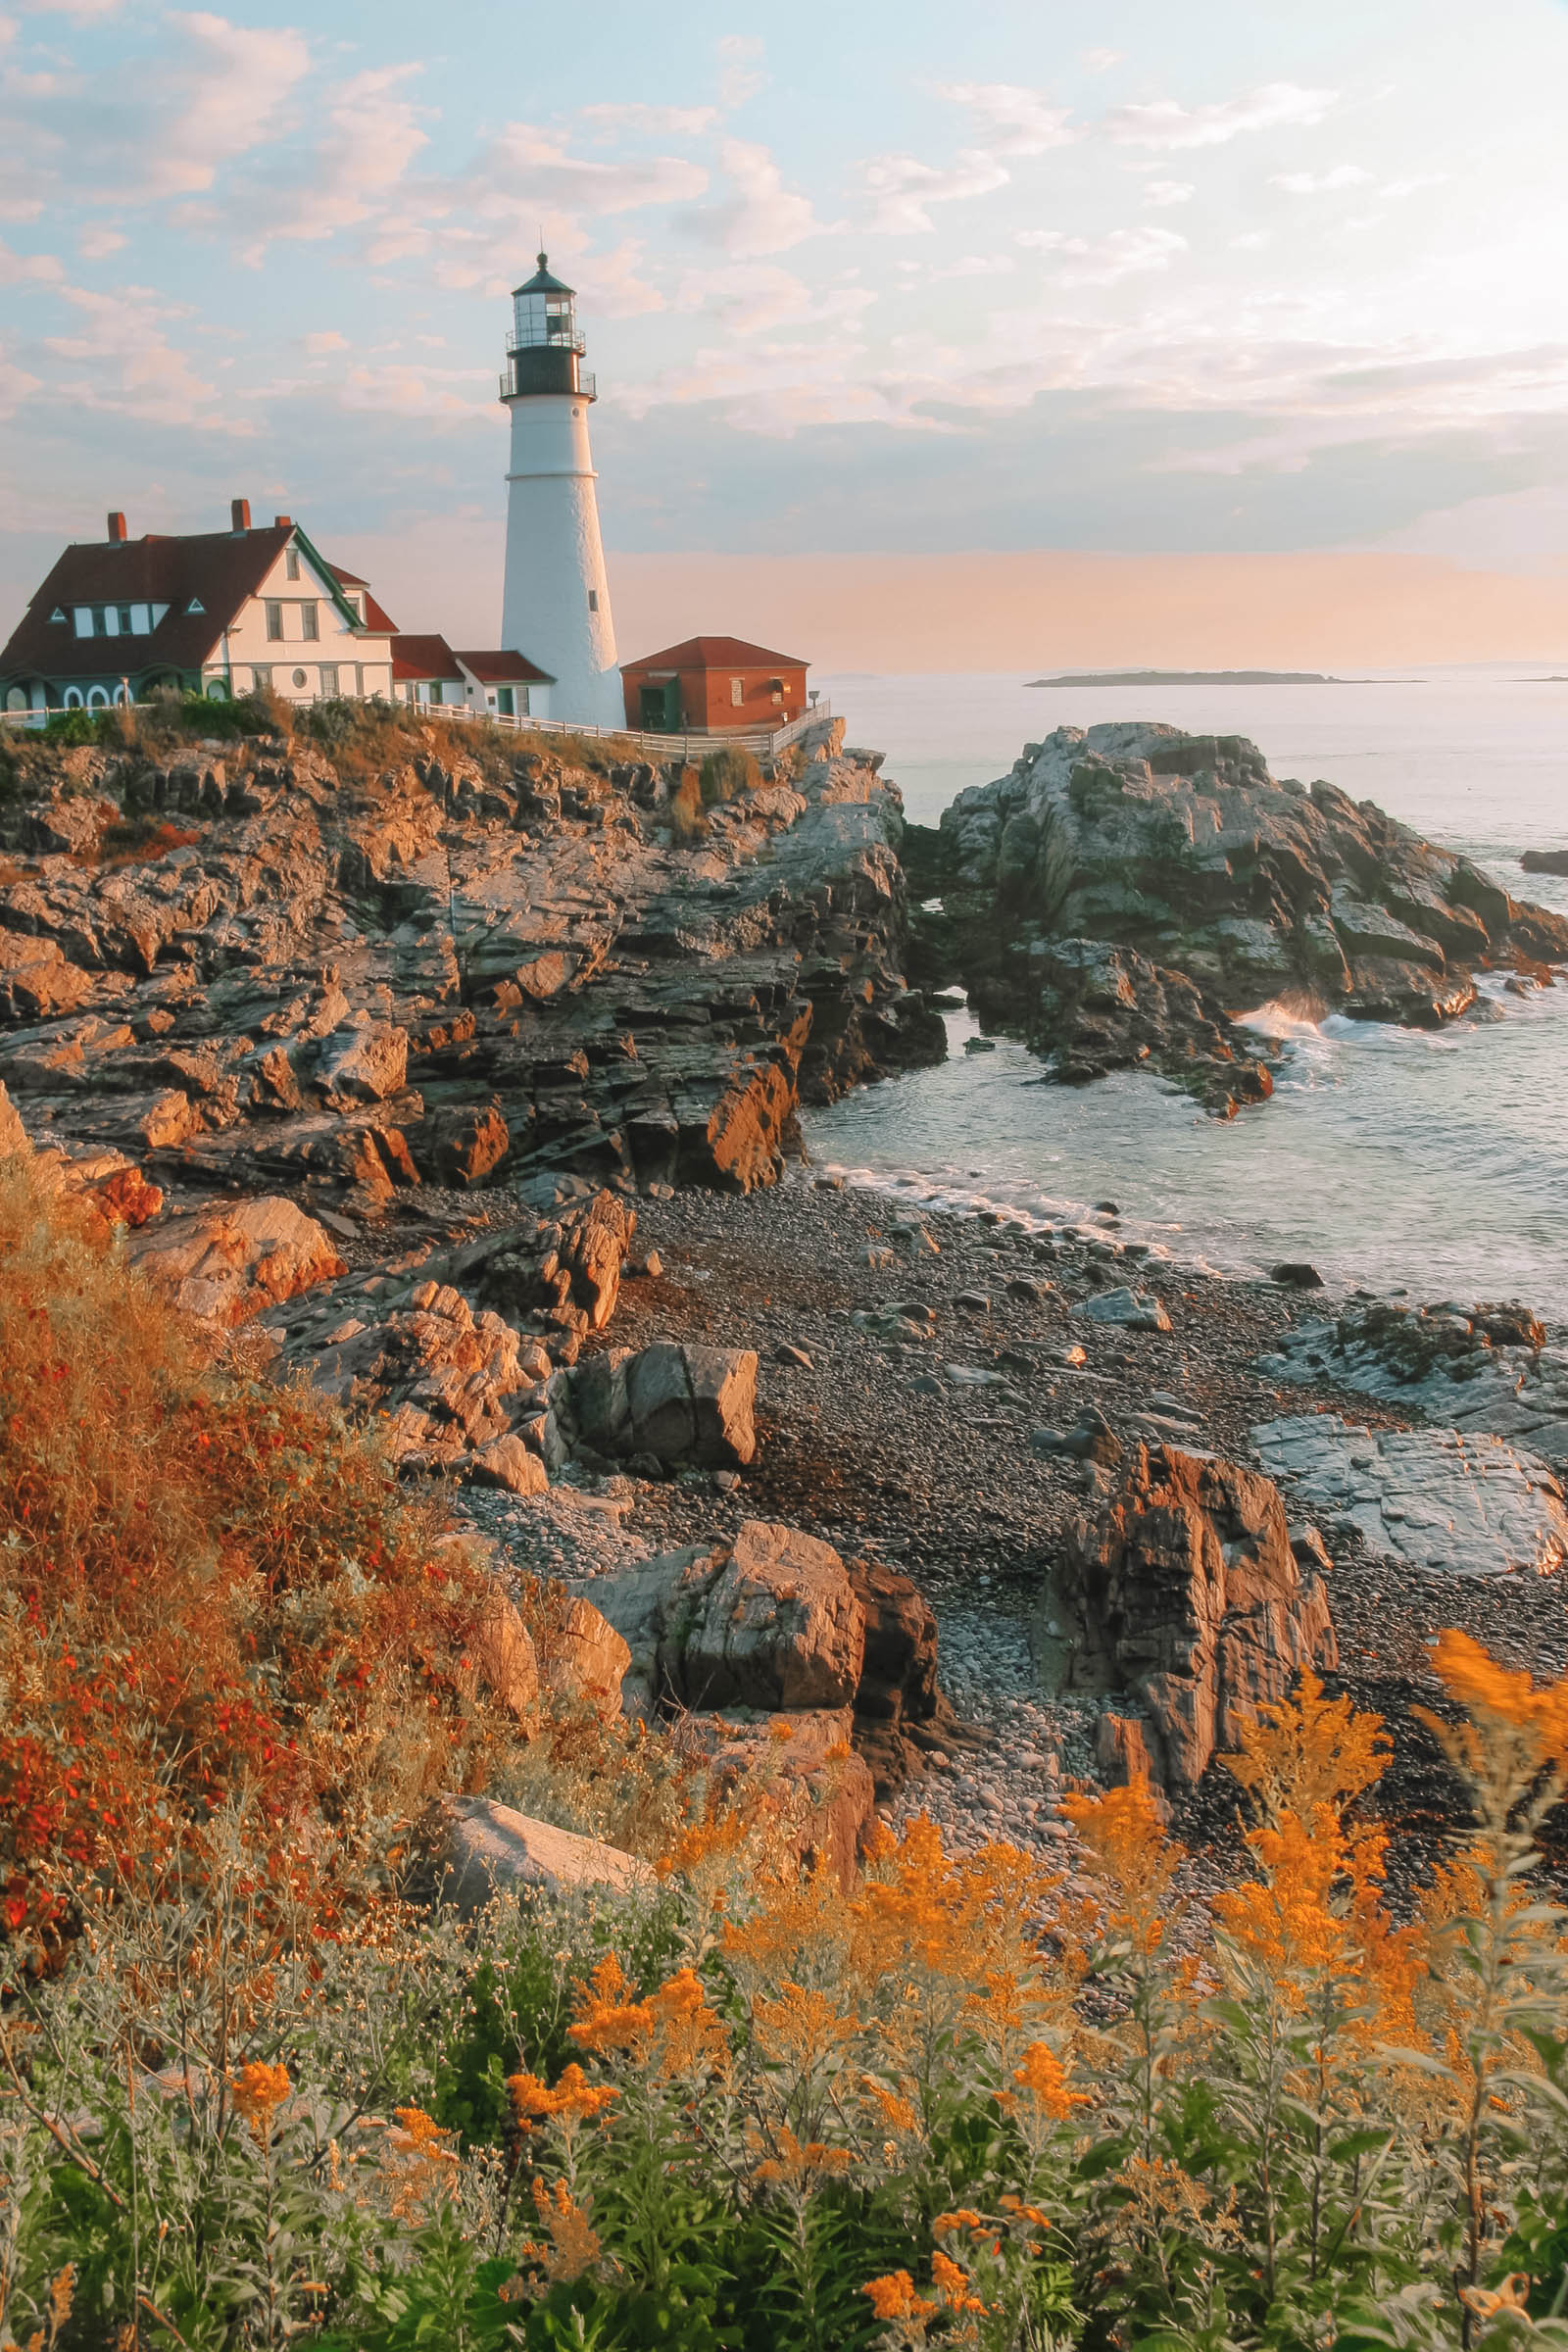 30 best places to visit on the east coast